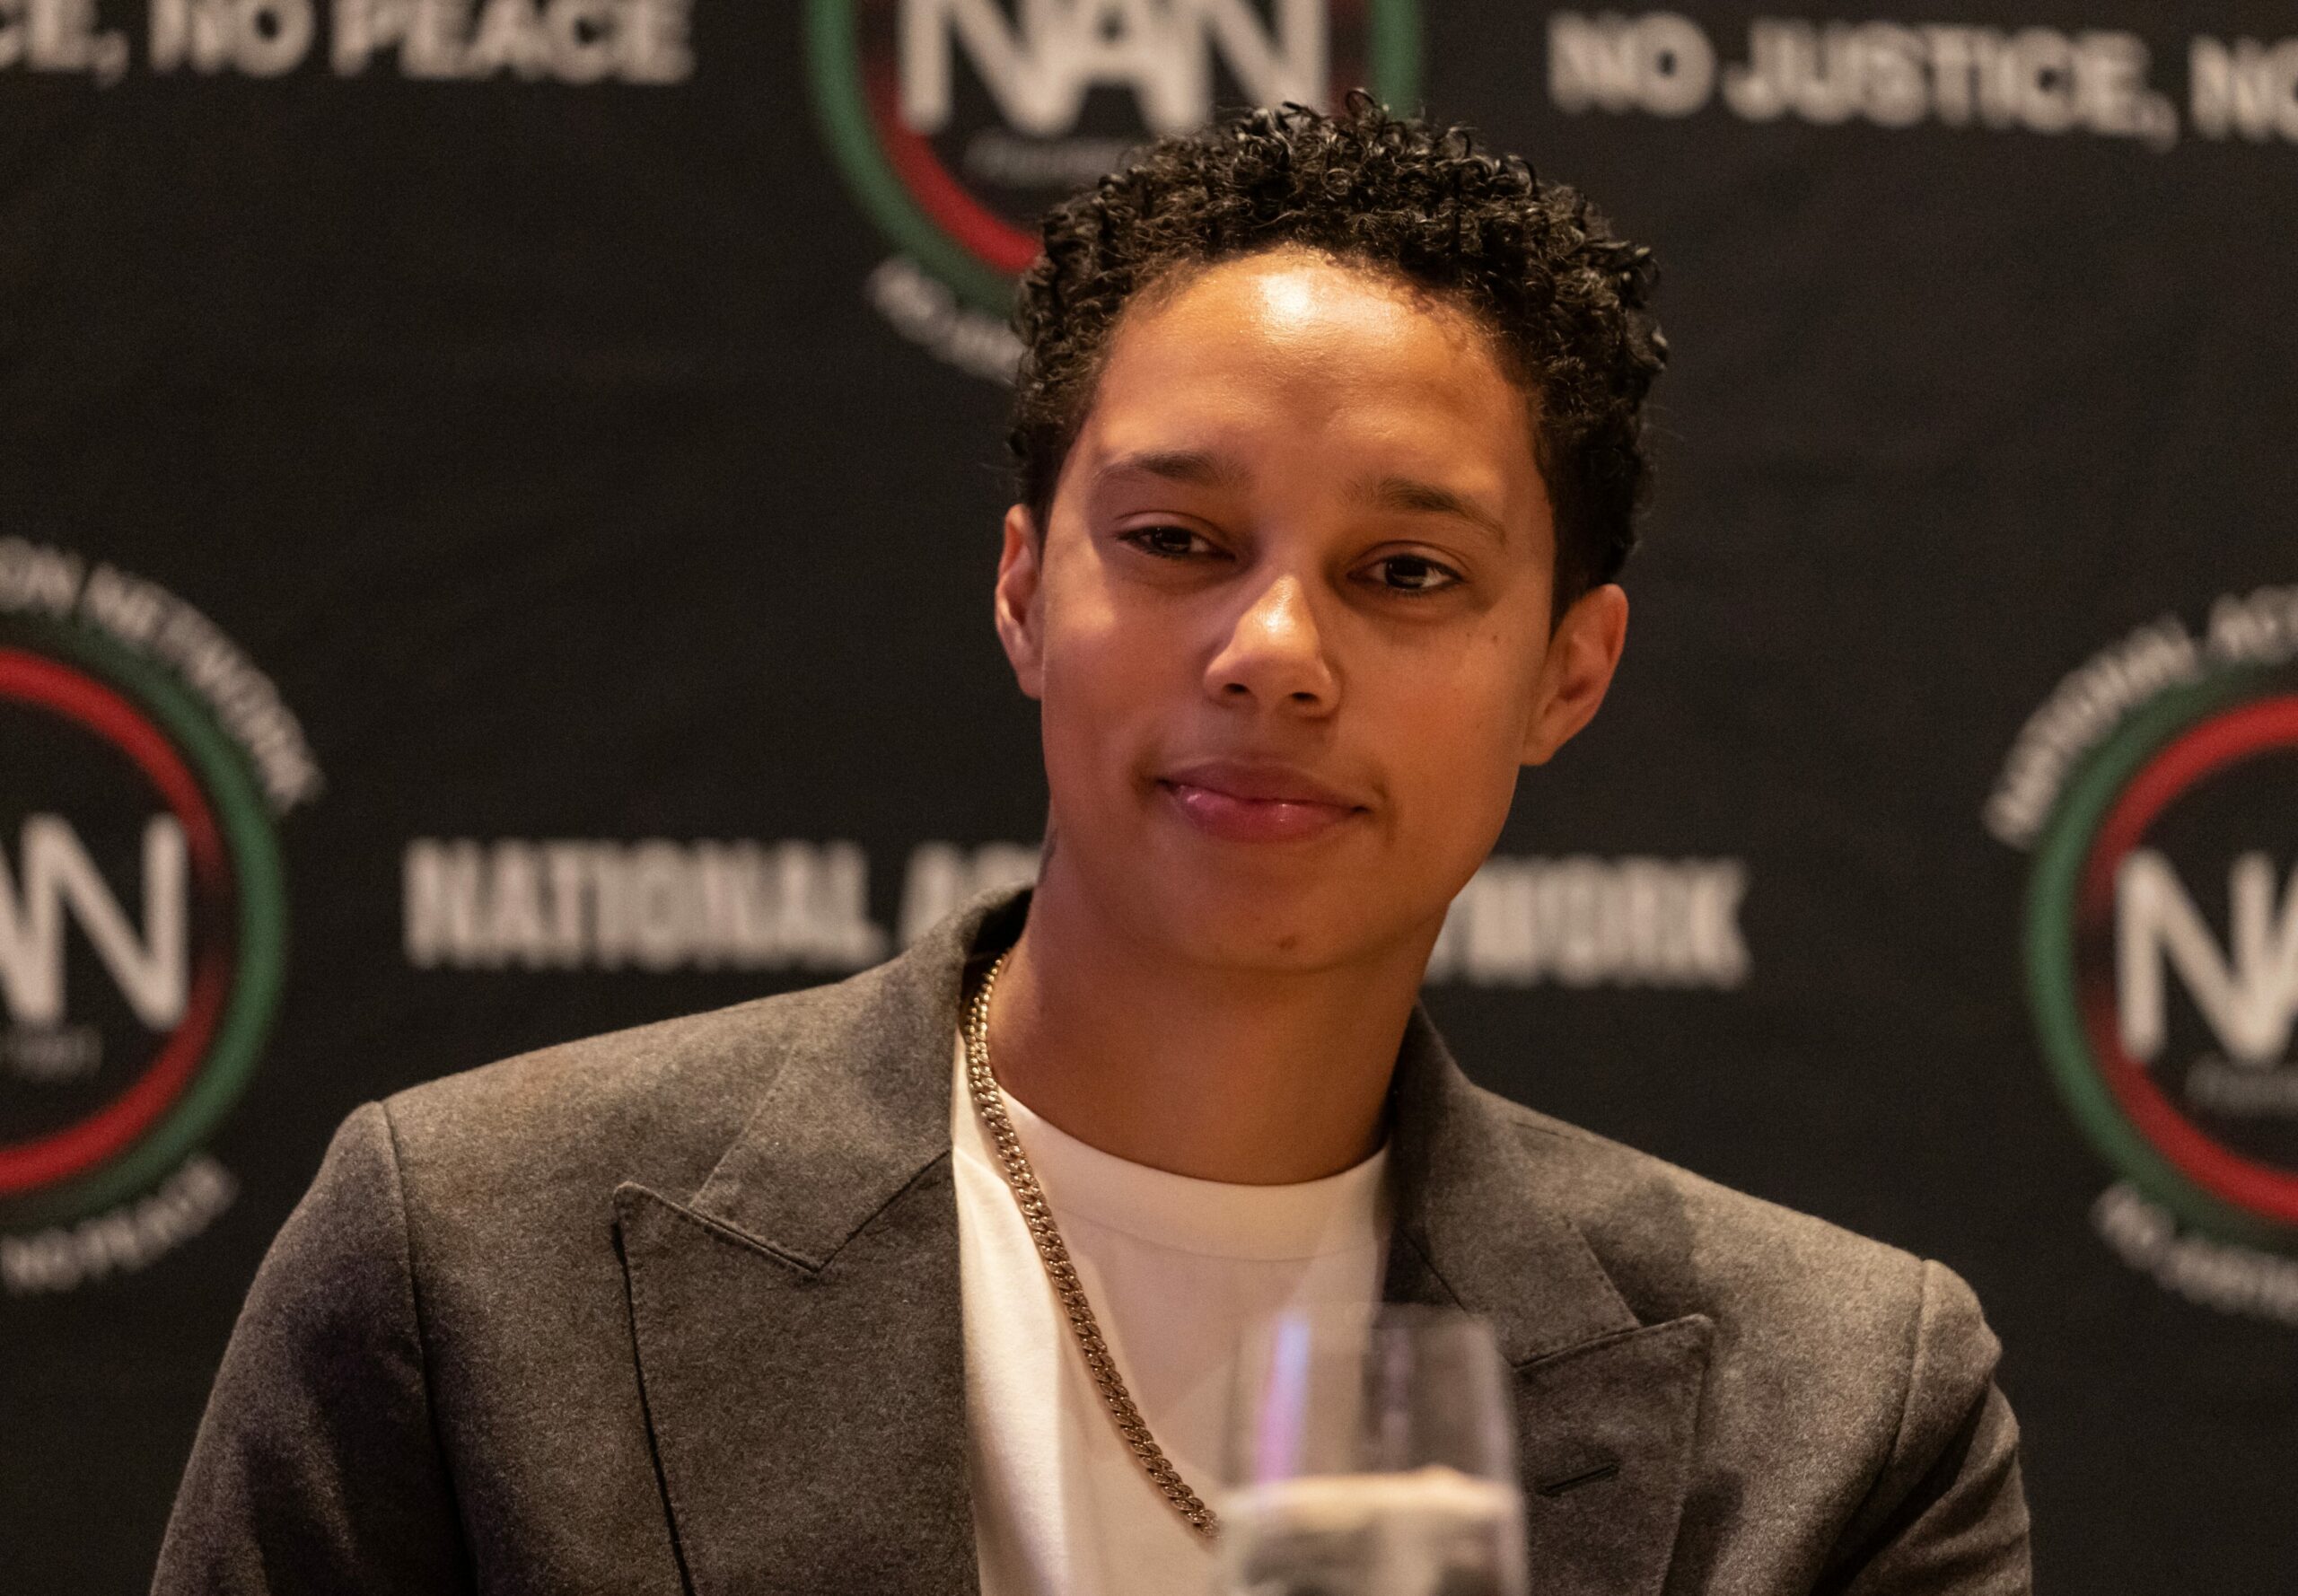 ESPN, Disney Announce Documentary Featuring Brittney Griner’s Russian Imprisonment